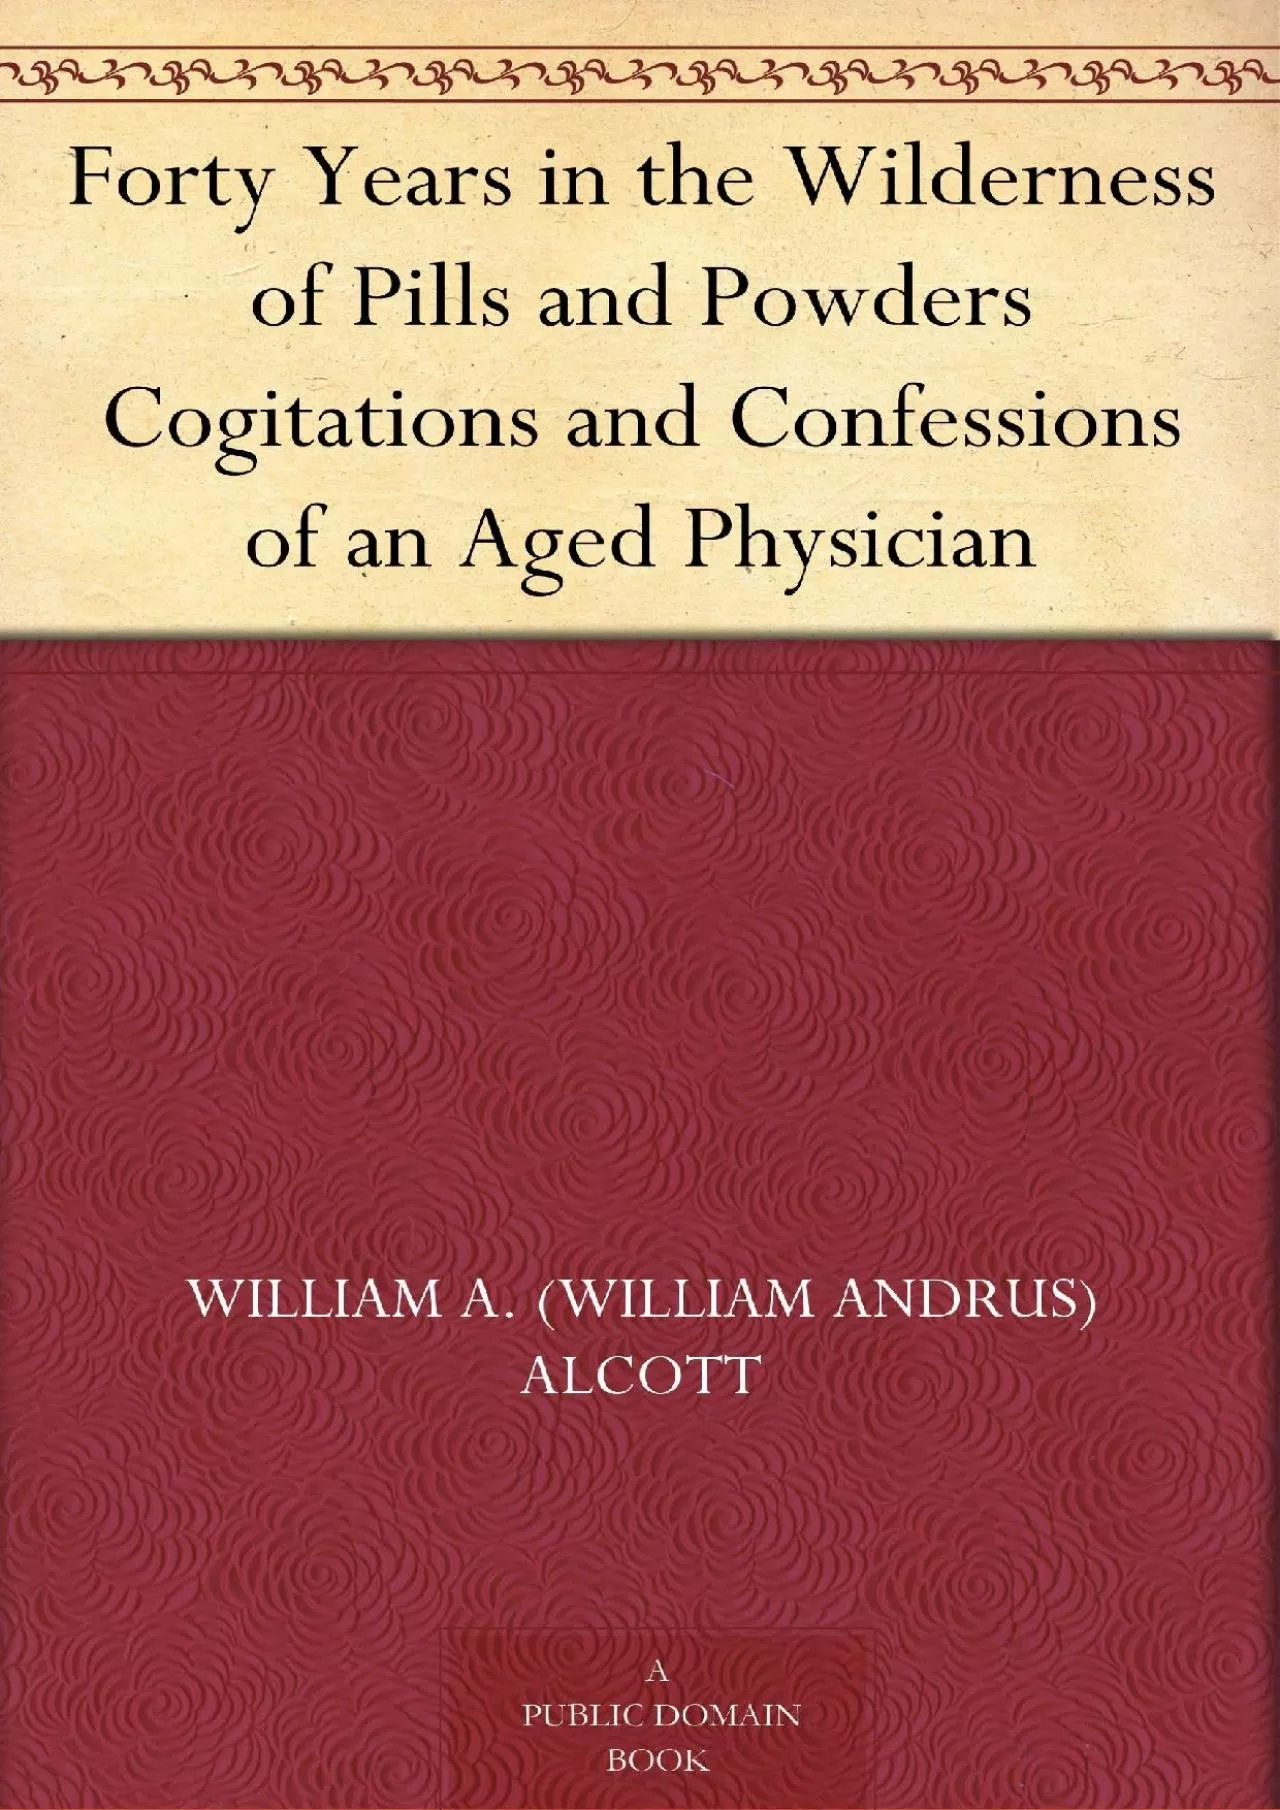 (EBOOK)-Forty Years in the Wilderness of Pills and Powders Cogitations and Confessions